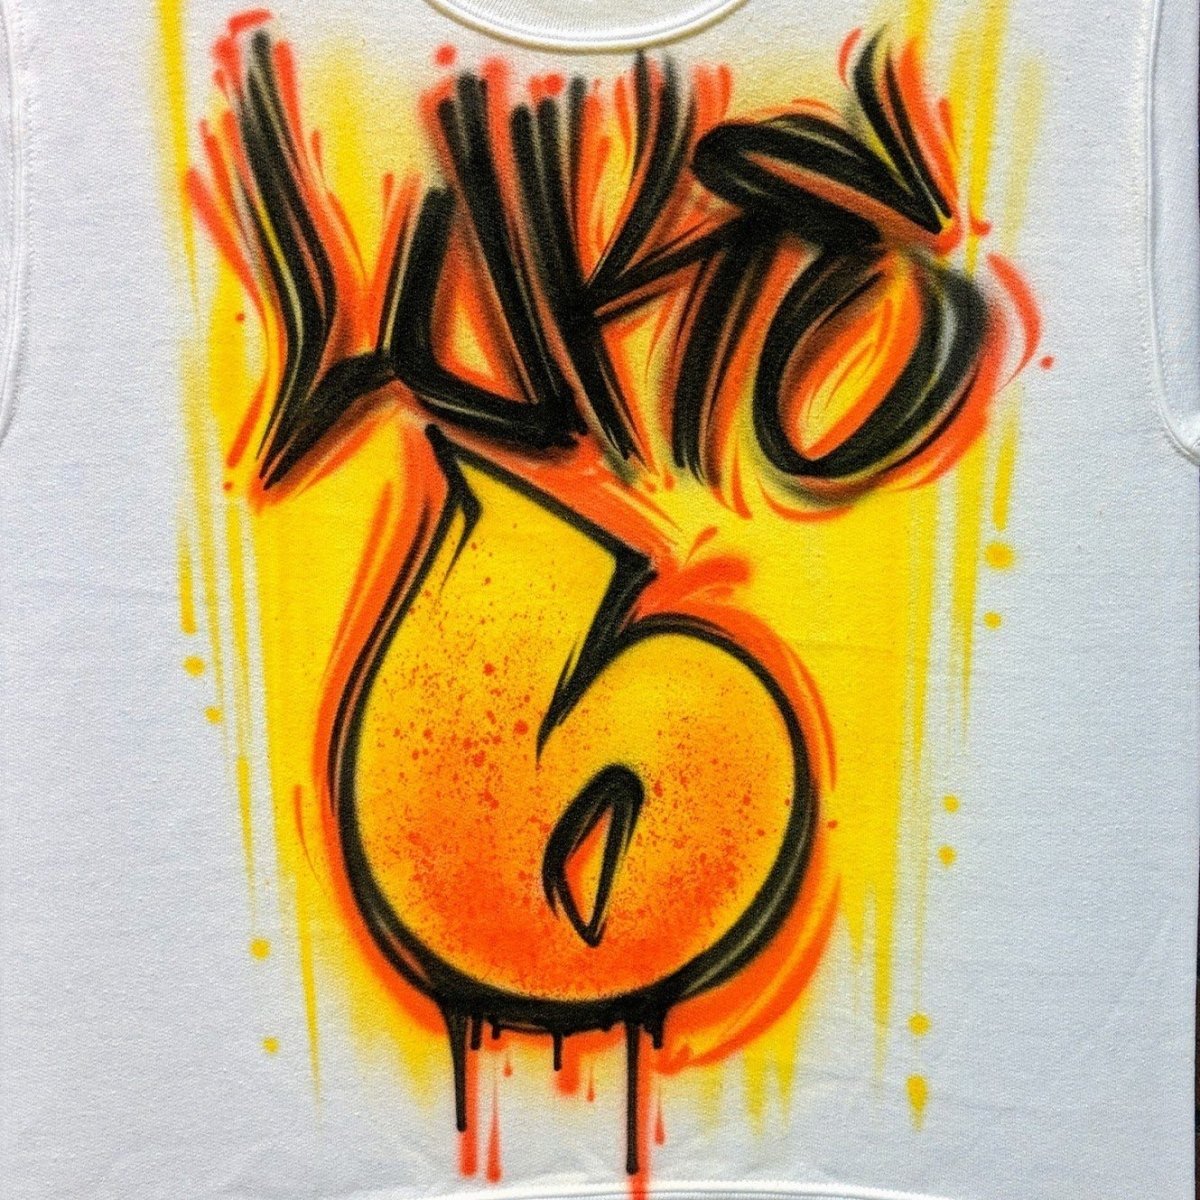 Grunge Name + Number Customizable Airbrush T shirt Design from Airbrush Customs x Dale The Airbrush Guy